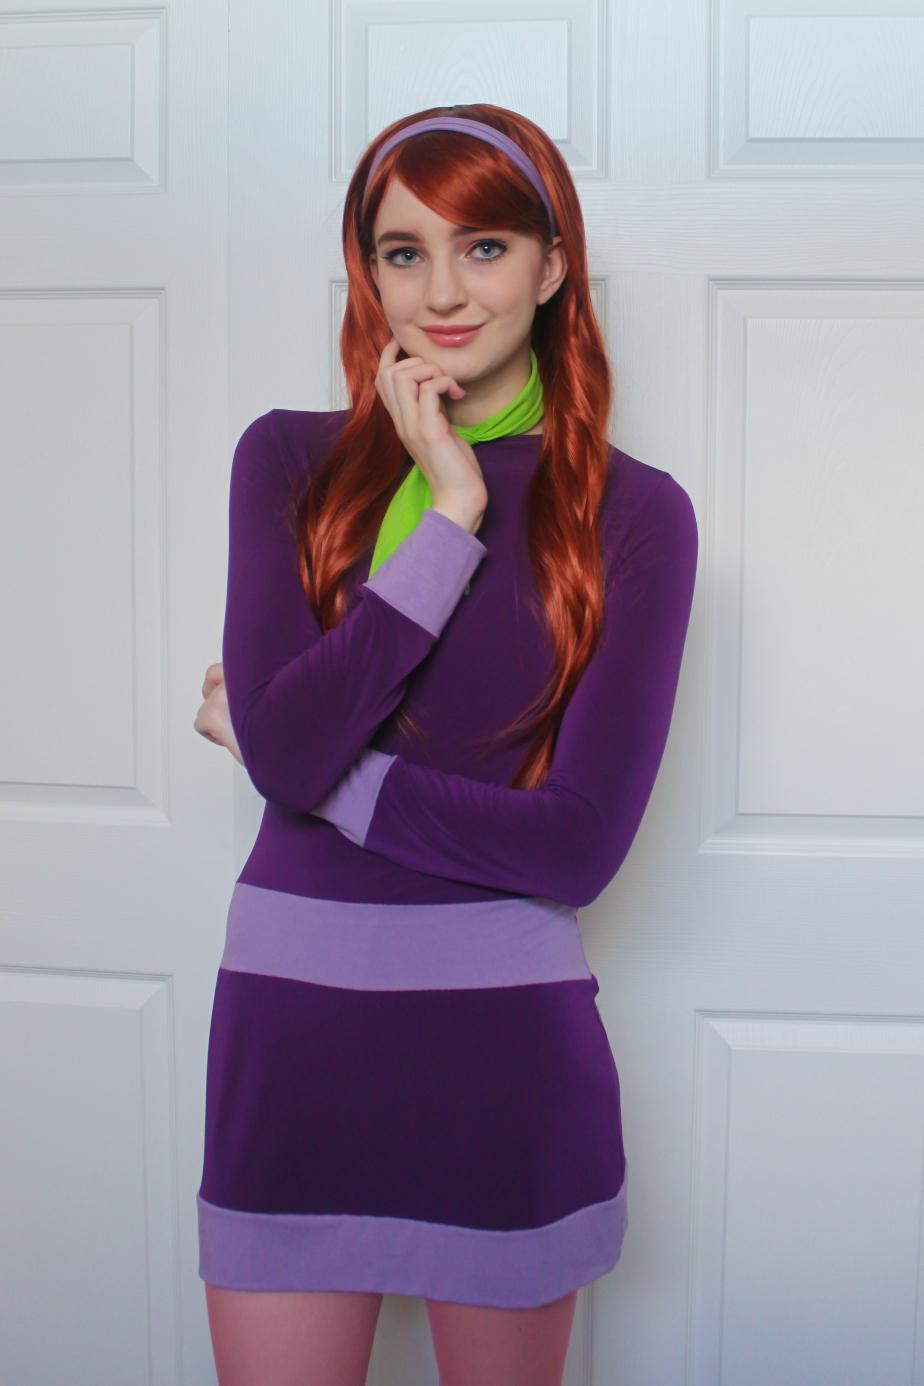 70+ Hot Pictures Of Daphne Blake From Scooby Doo Which Are Sure to Catch Your Attention 110